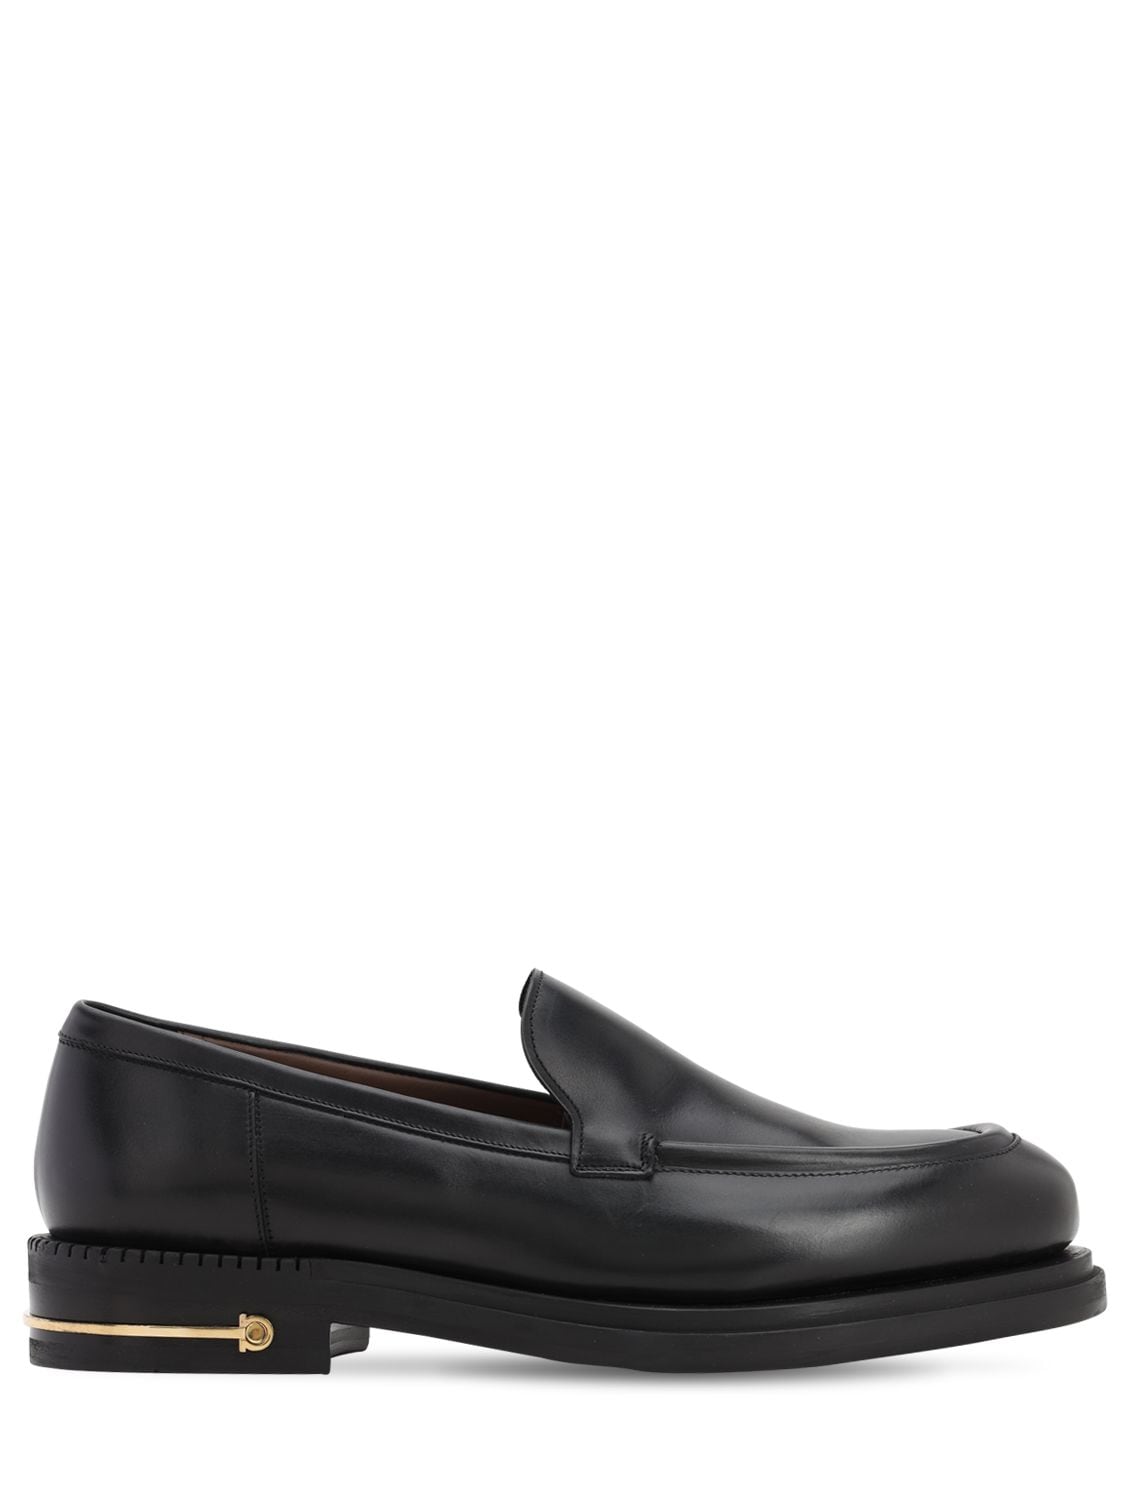 Teeth 3 Calfskin Leather Loafers